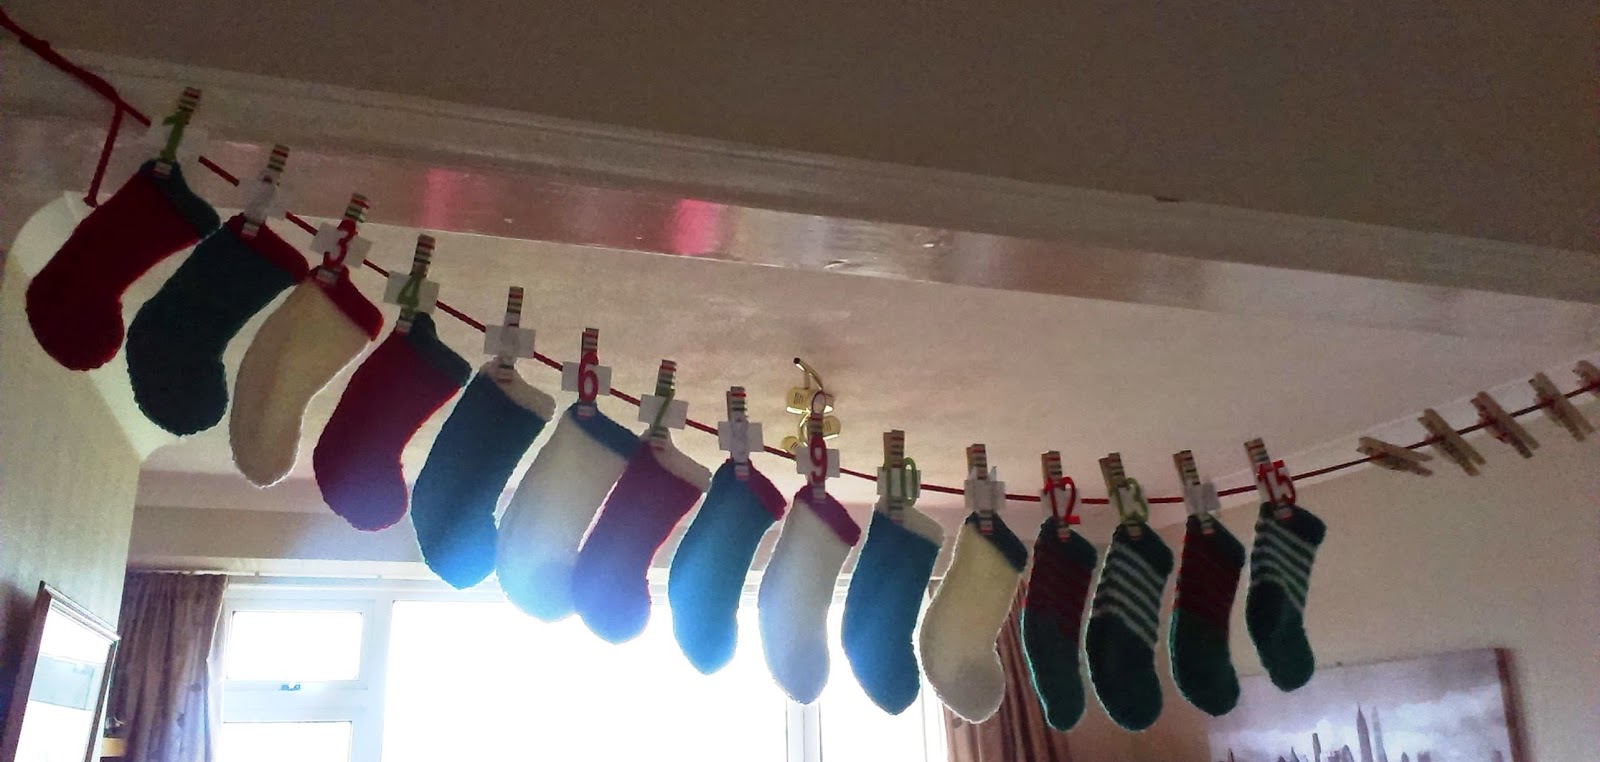 Knitted advent stockings